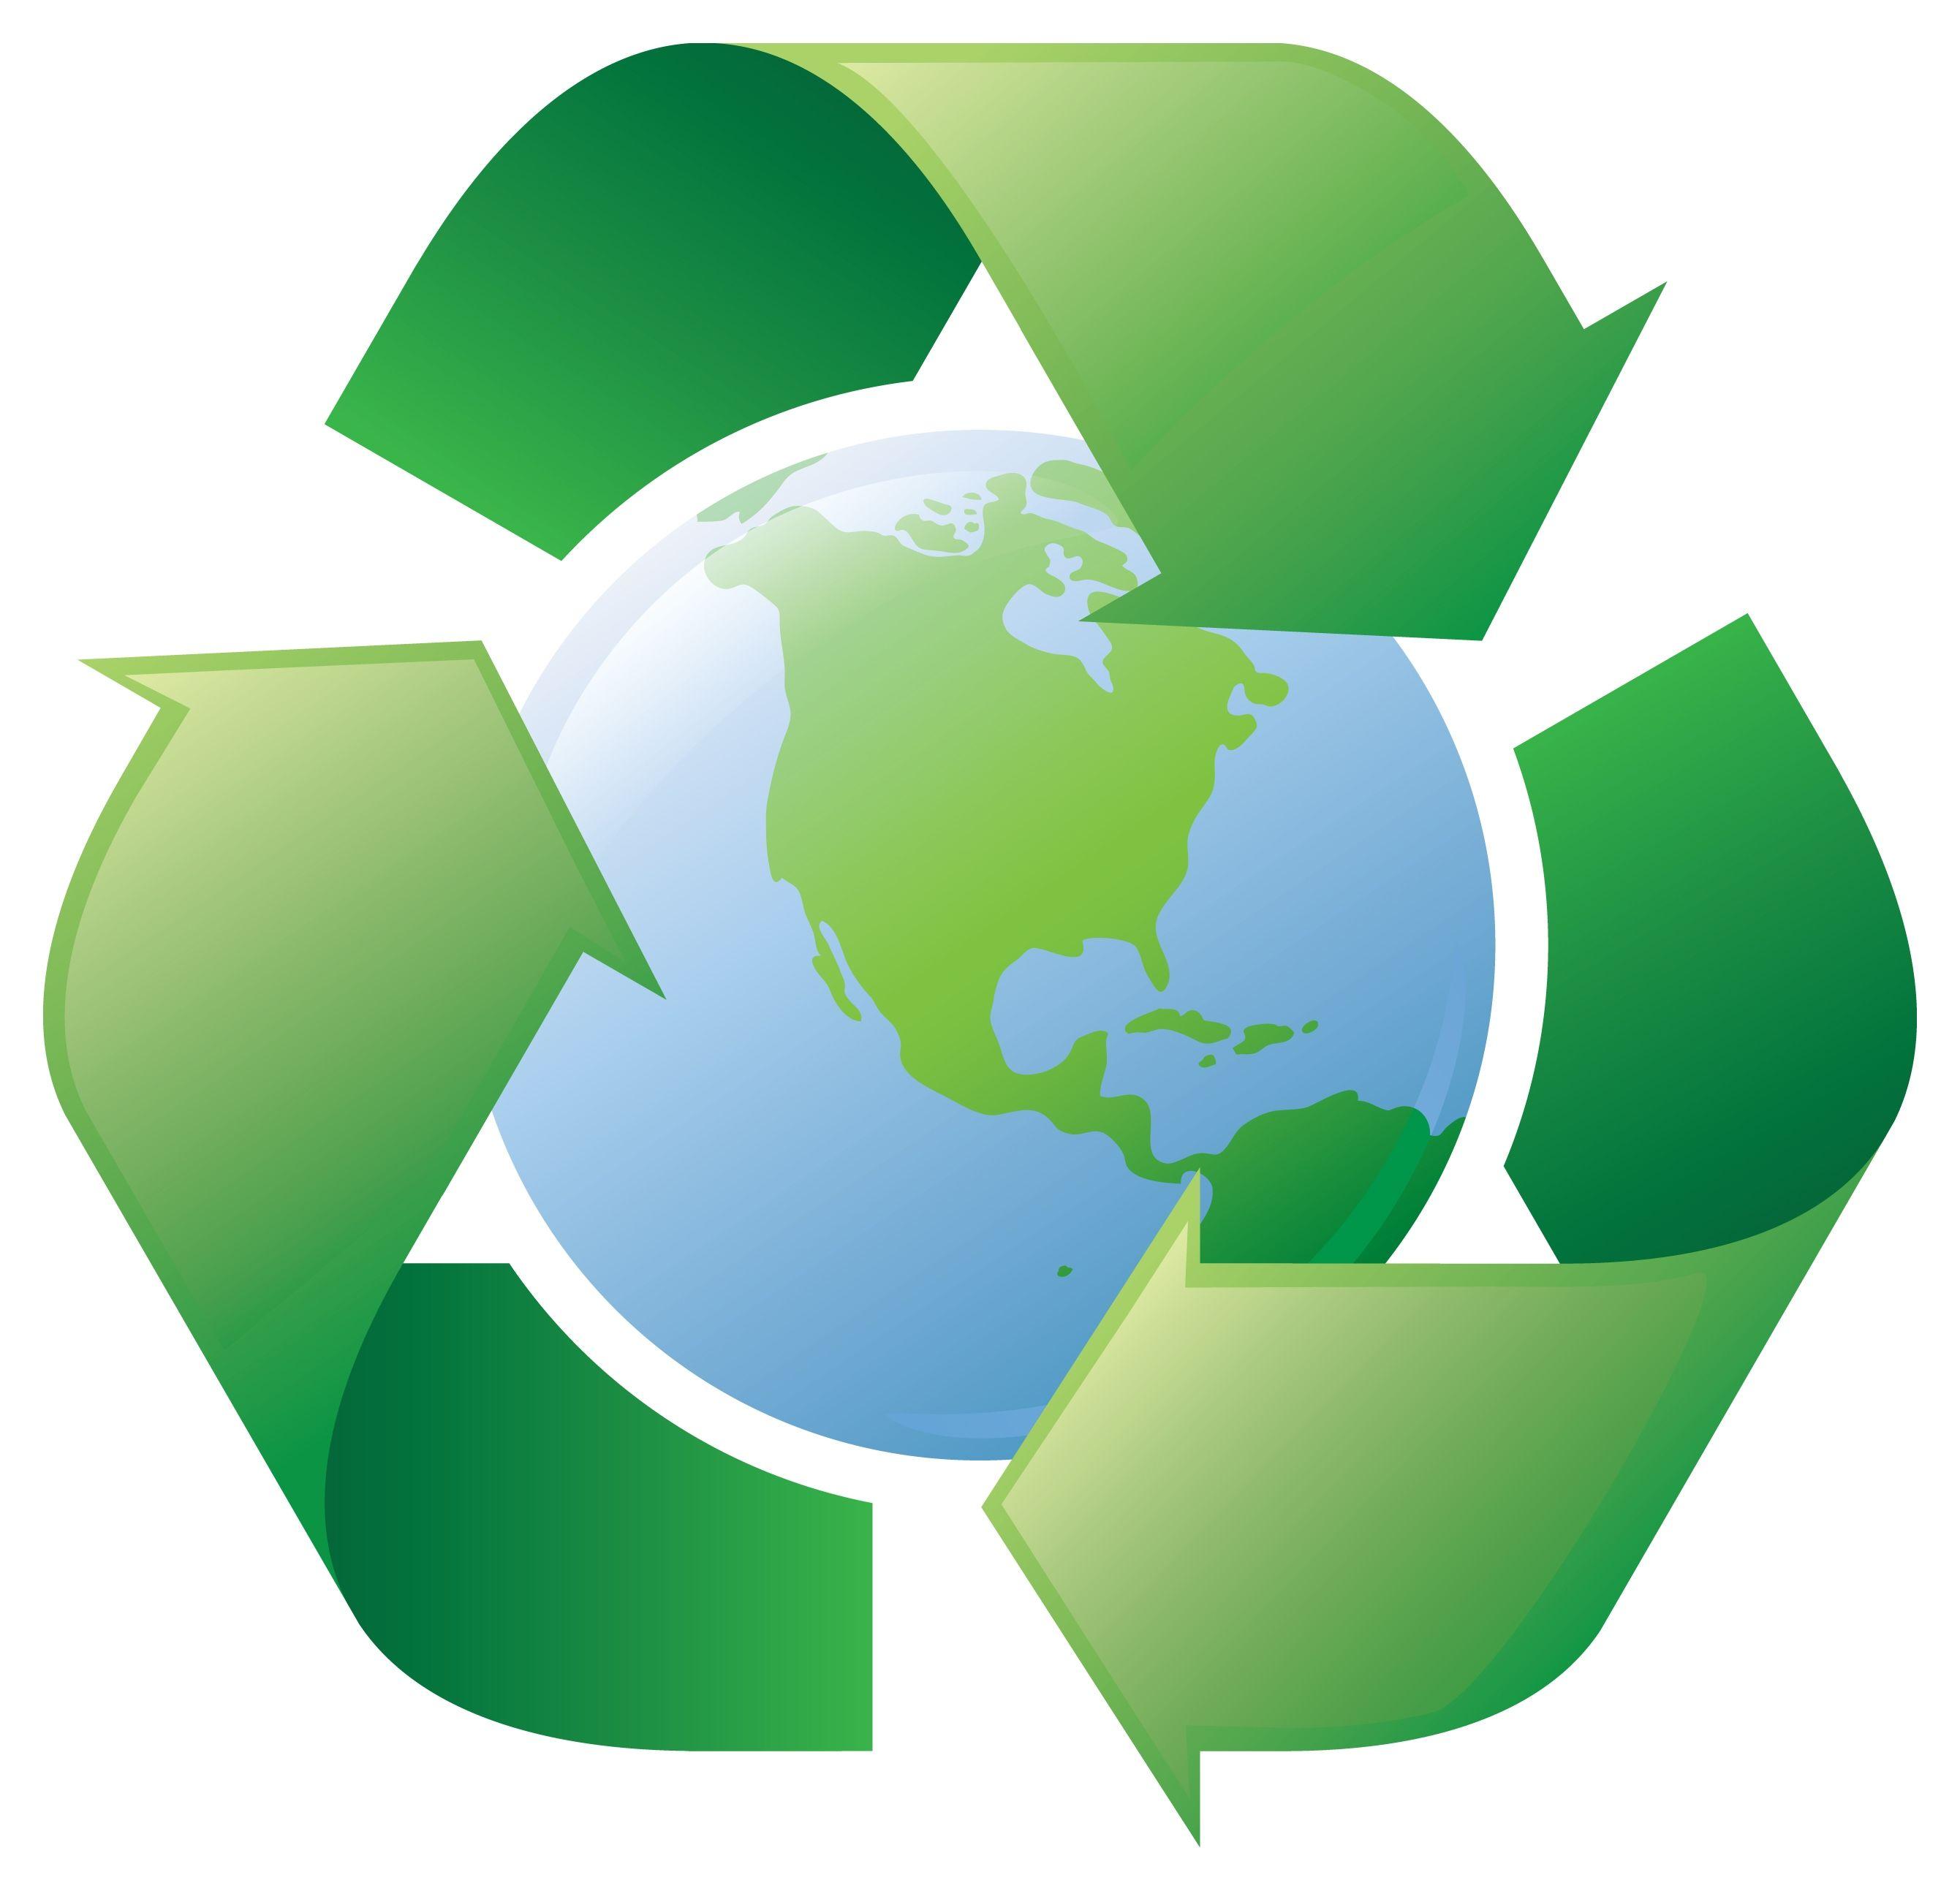 We Recycle Logo - Free Recycle Symbol, Download Free Clip Art, Free Clip Art on ...